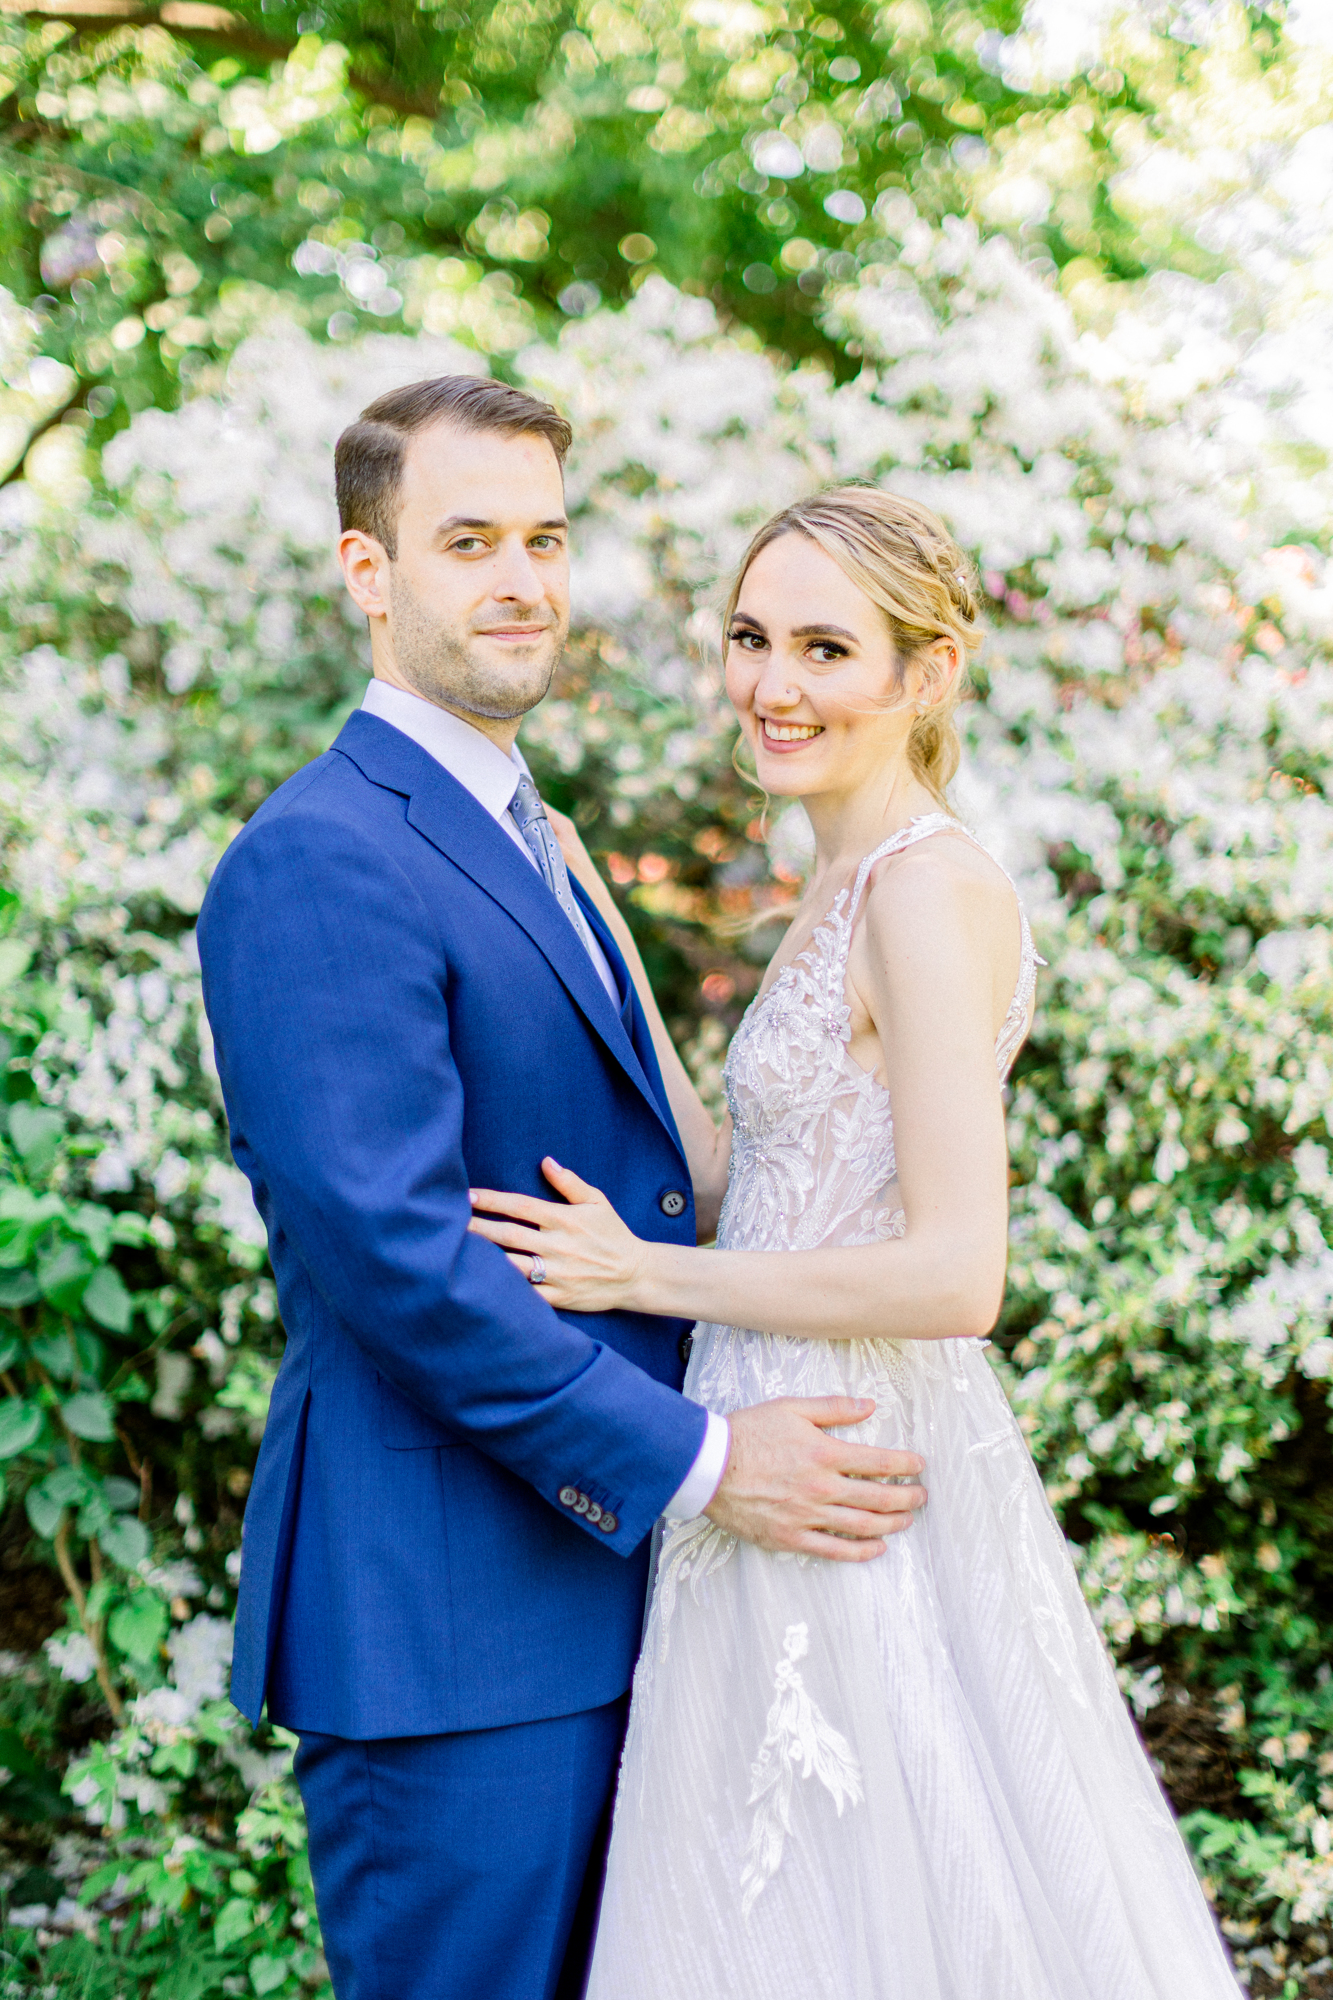 Stunning Elopement Photos in Central Park's Spring Wisteria Pergola